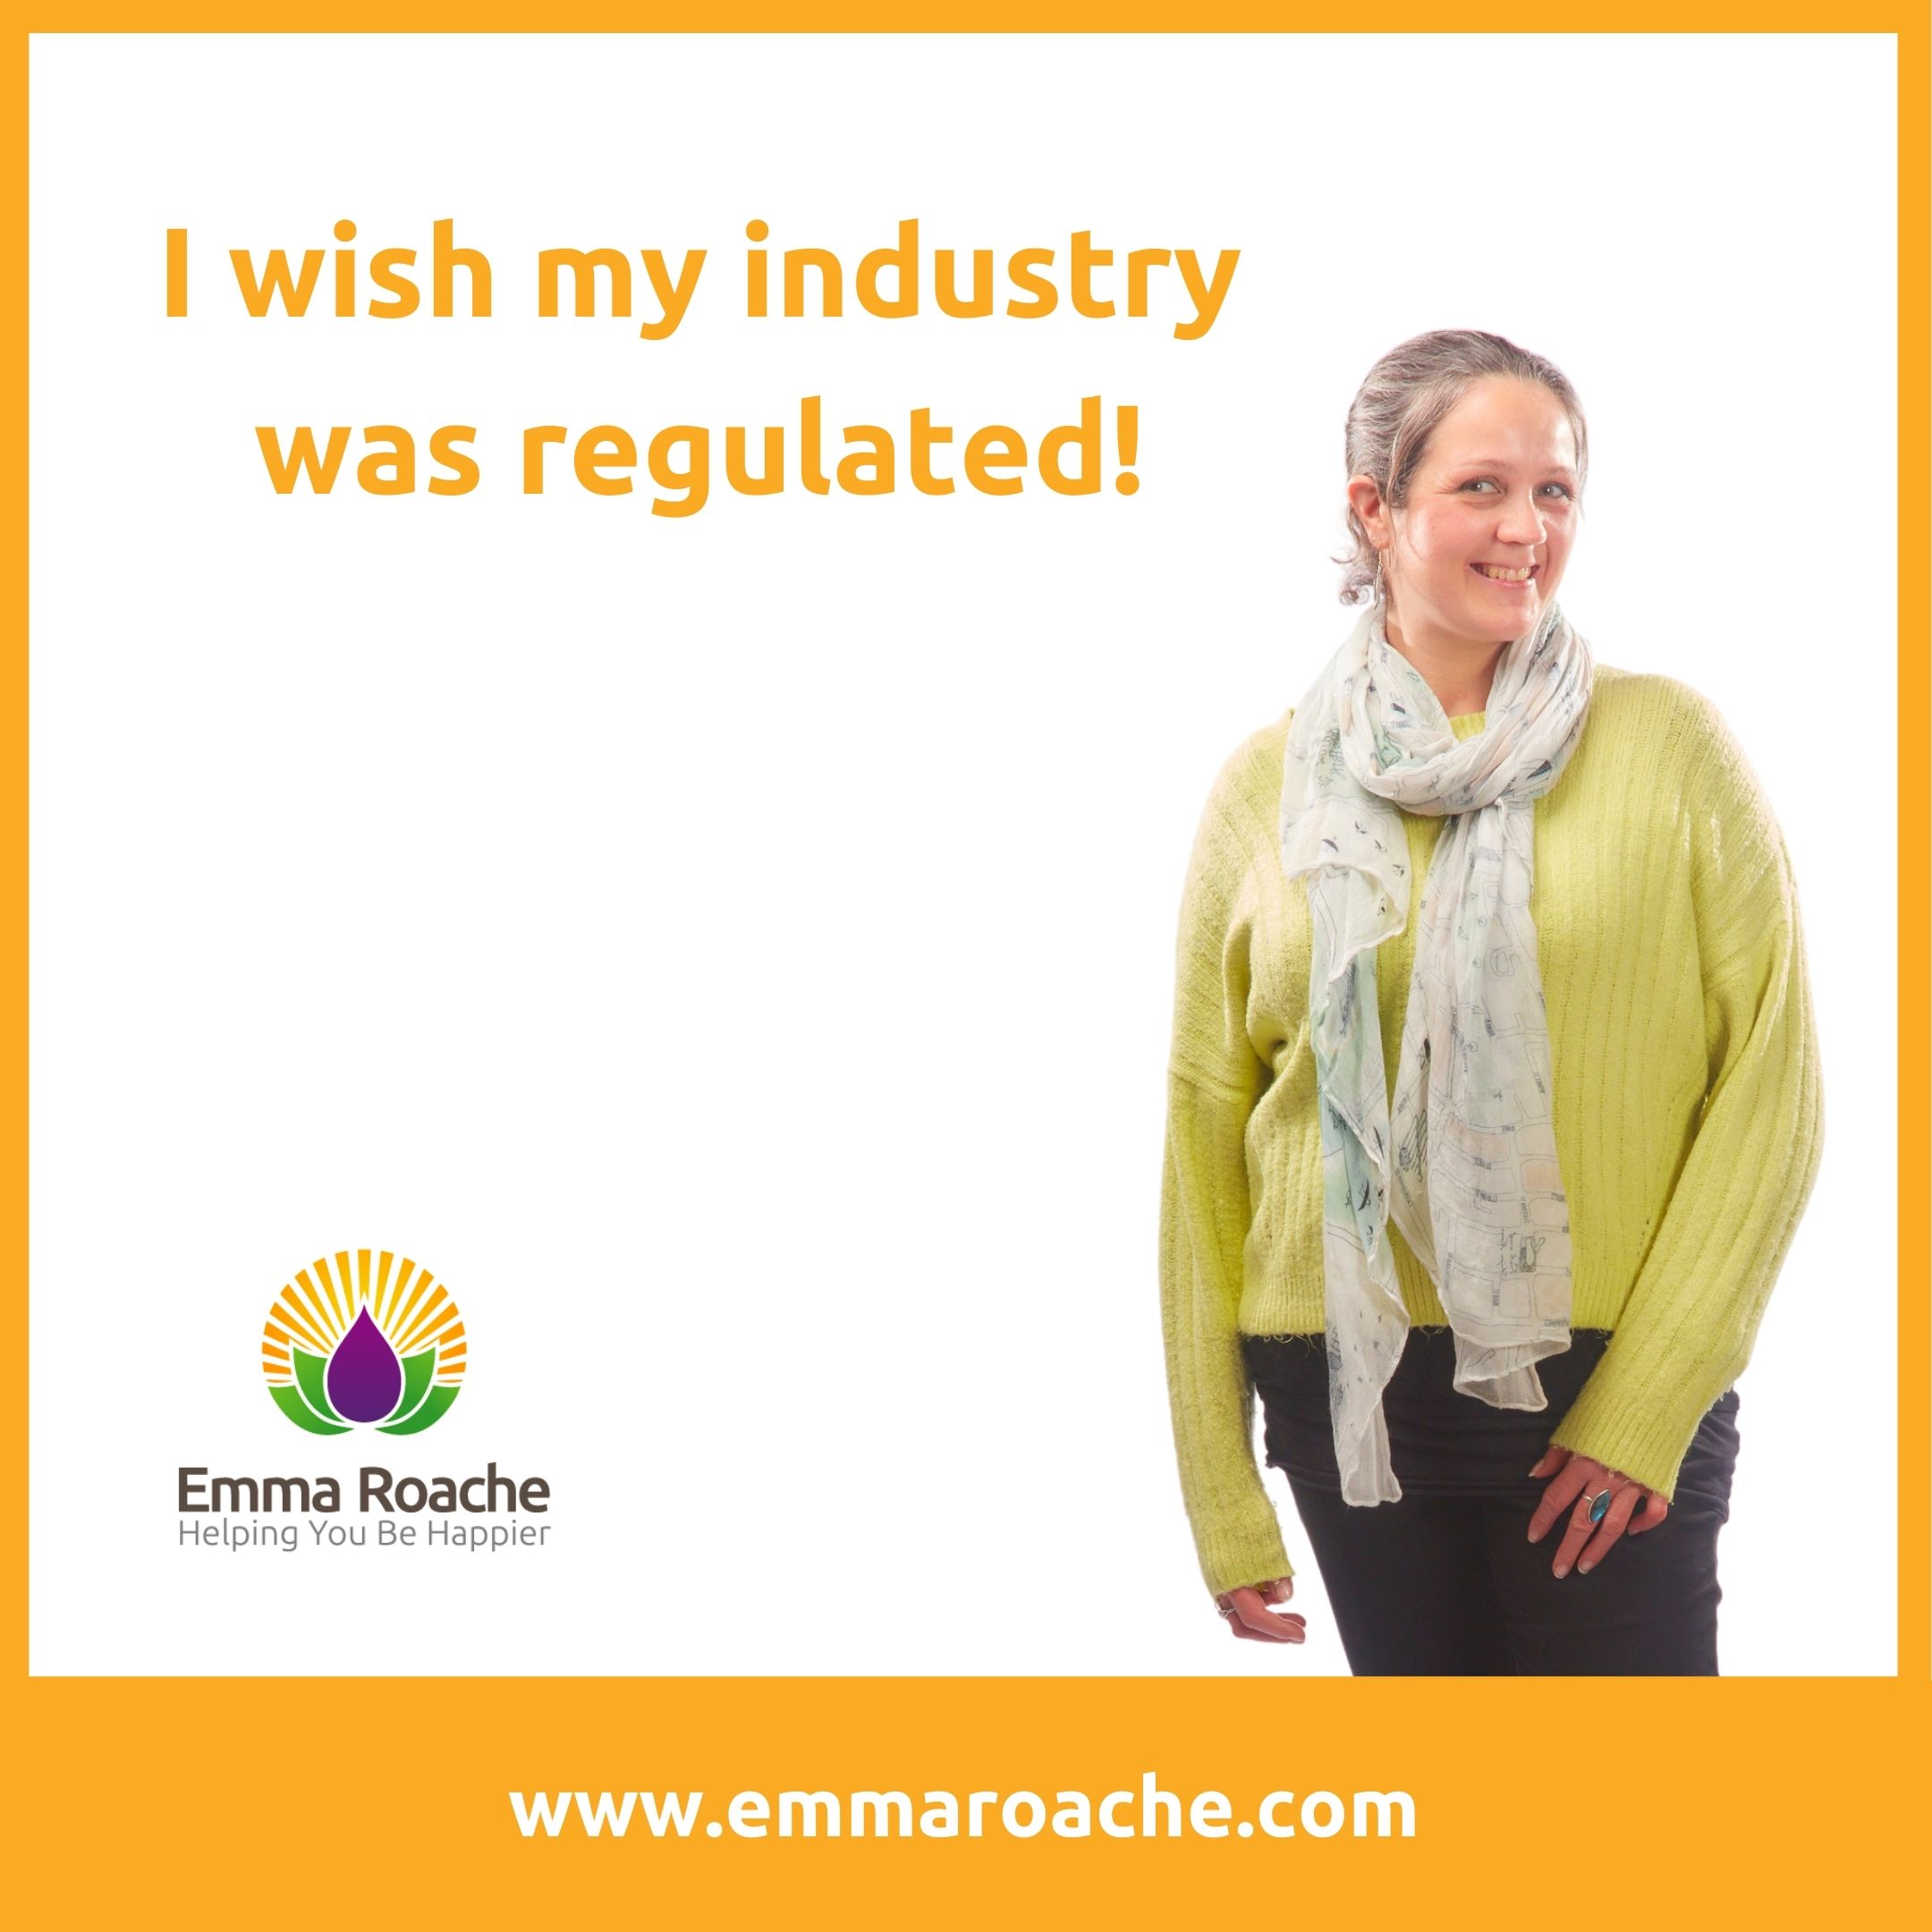 I wish my industry was regulated!